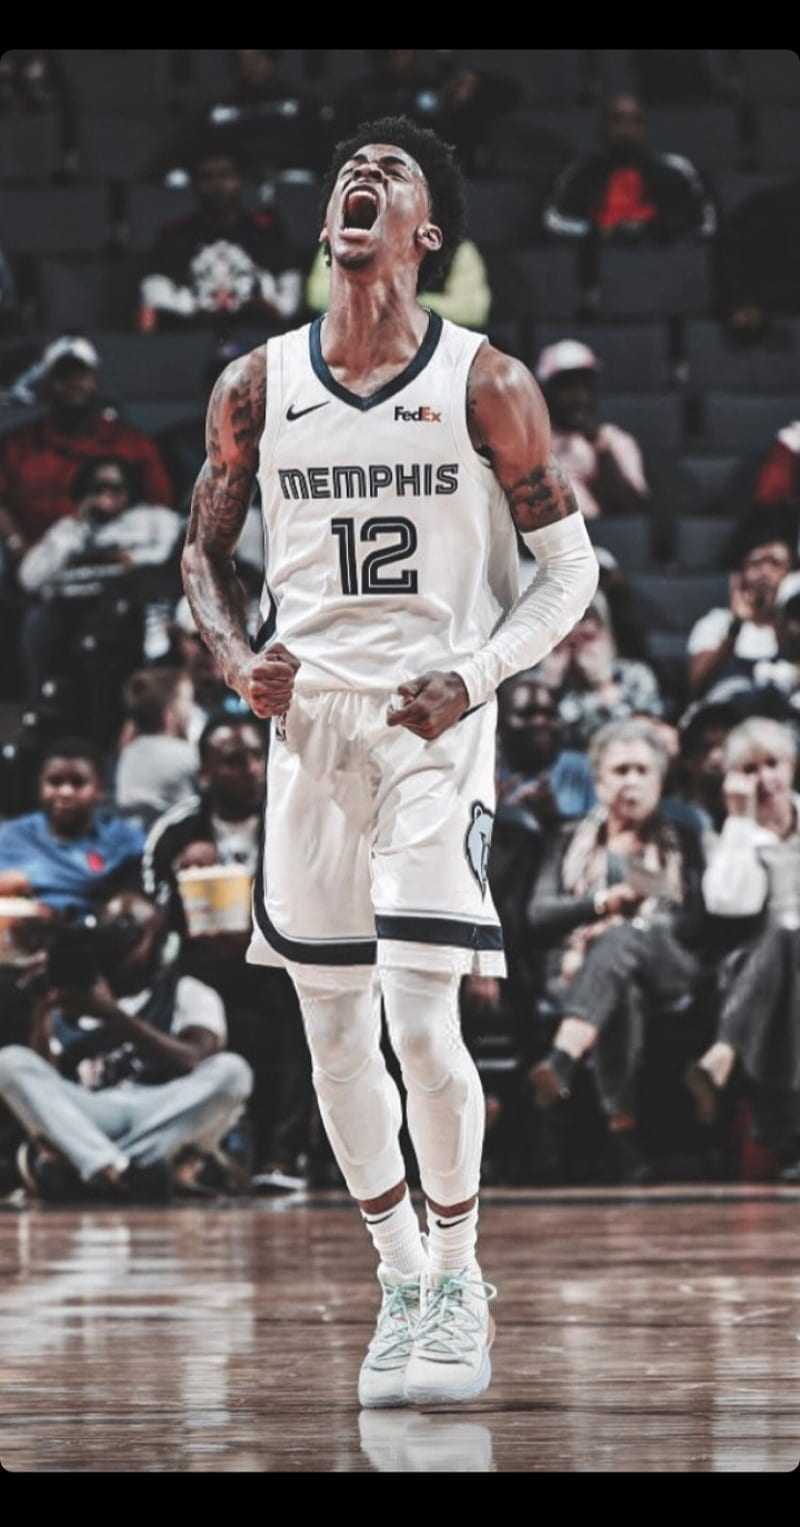 A basketball player in the middle of his game - Ja Morant, NBA